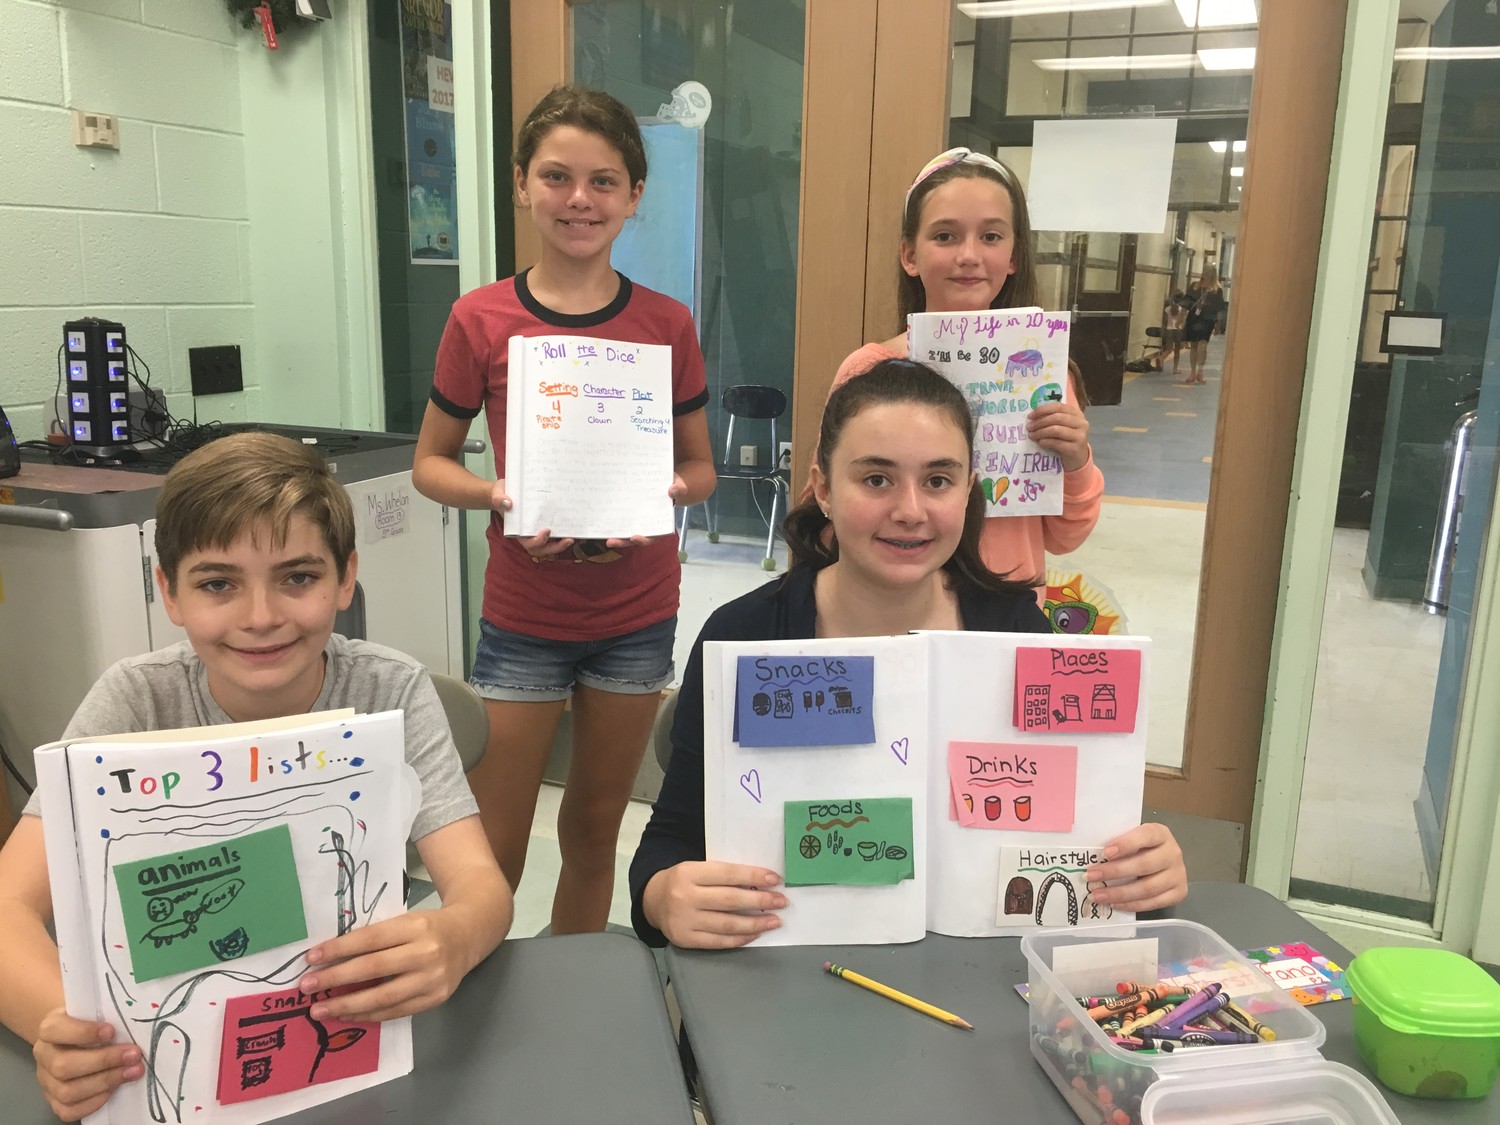 Students proudly displayed their journals that they worked on in a class called Write On.